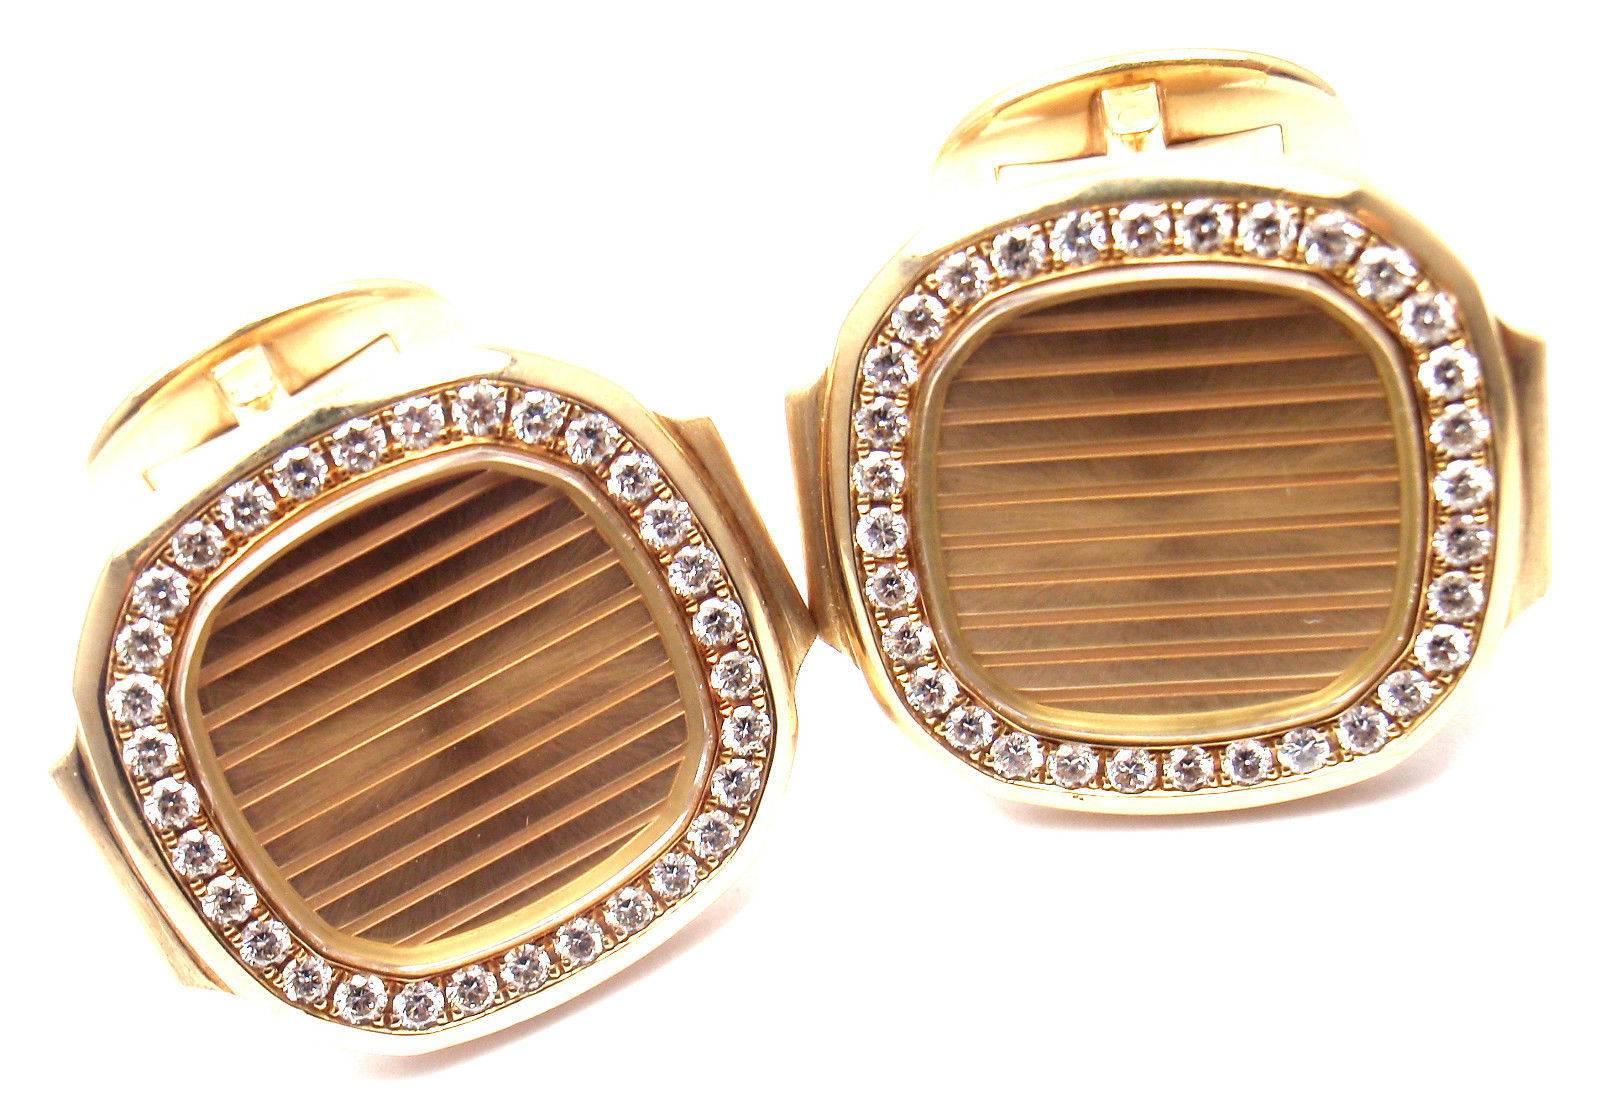 18k Yellow Gold Diamond Nautilus Cufflinks by Patek Philippe.
With 66 round brilliant cut diamonds VS1 clarity, G color total weight approx. 1ct

Details:
Measurements: 20mm x 22mm x 22mm
Weight: 30 grams
Stamped Hallmarks: Patek-Phillippe 750